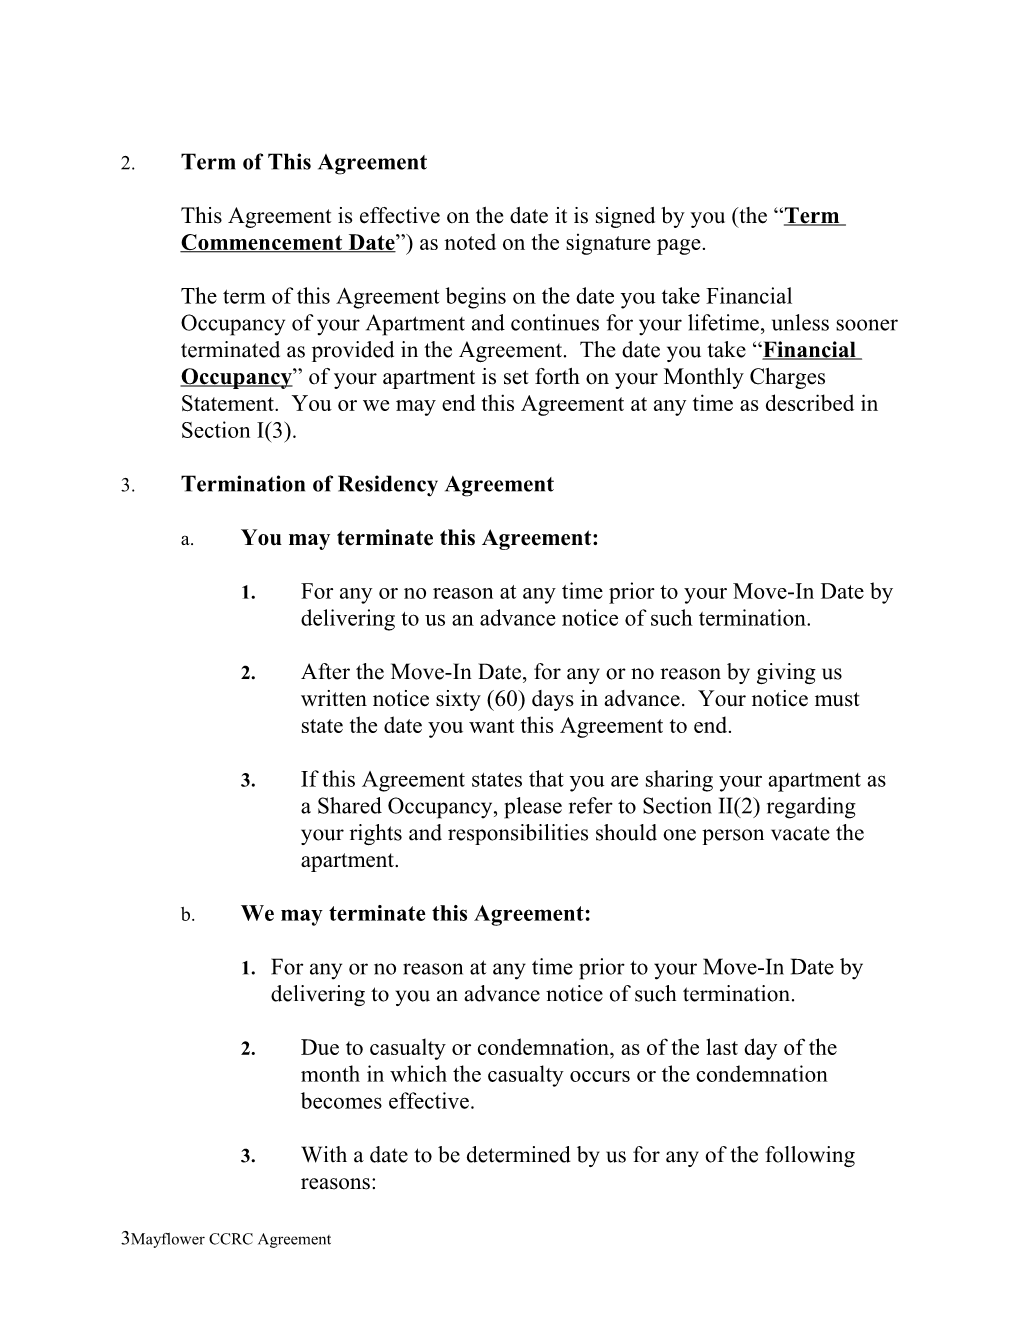 Residency and Services Agreement